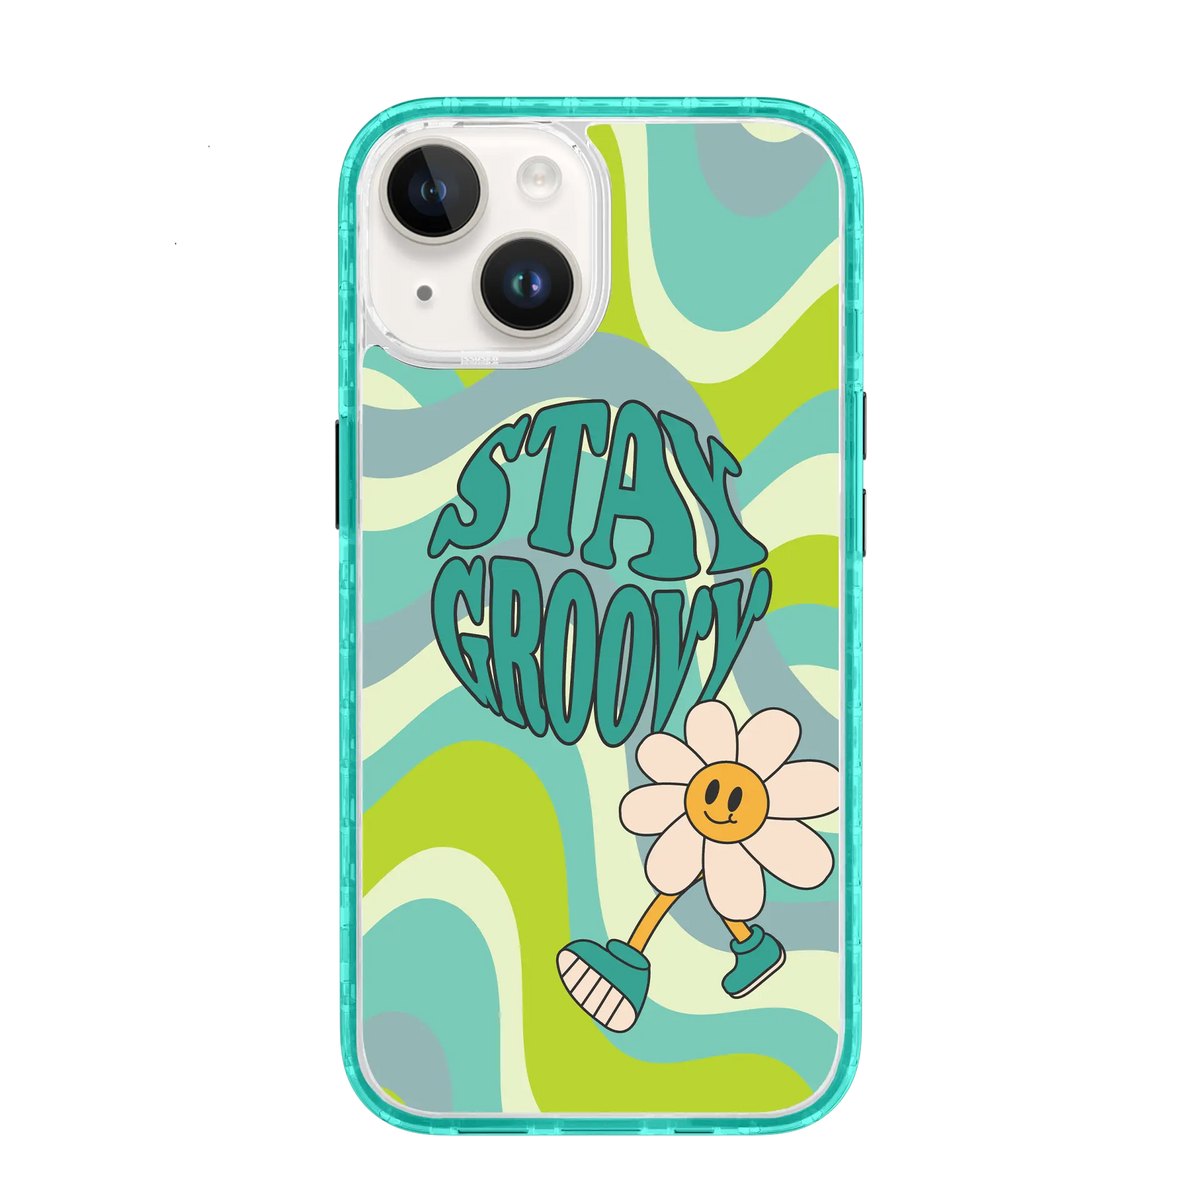 AppleiPhone14SeafoamGreen Stay Groovy | That 70's Case Series | Custom MagSafe Case Design for Apple iPhone 14 Series cellhelmet cellhelmet